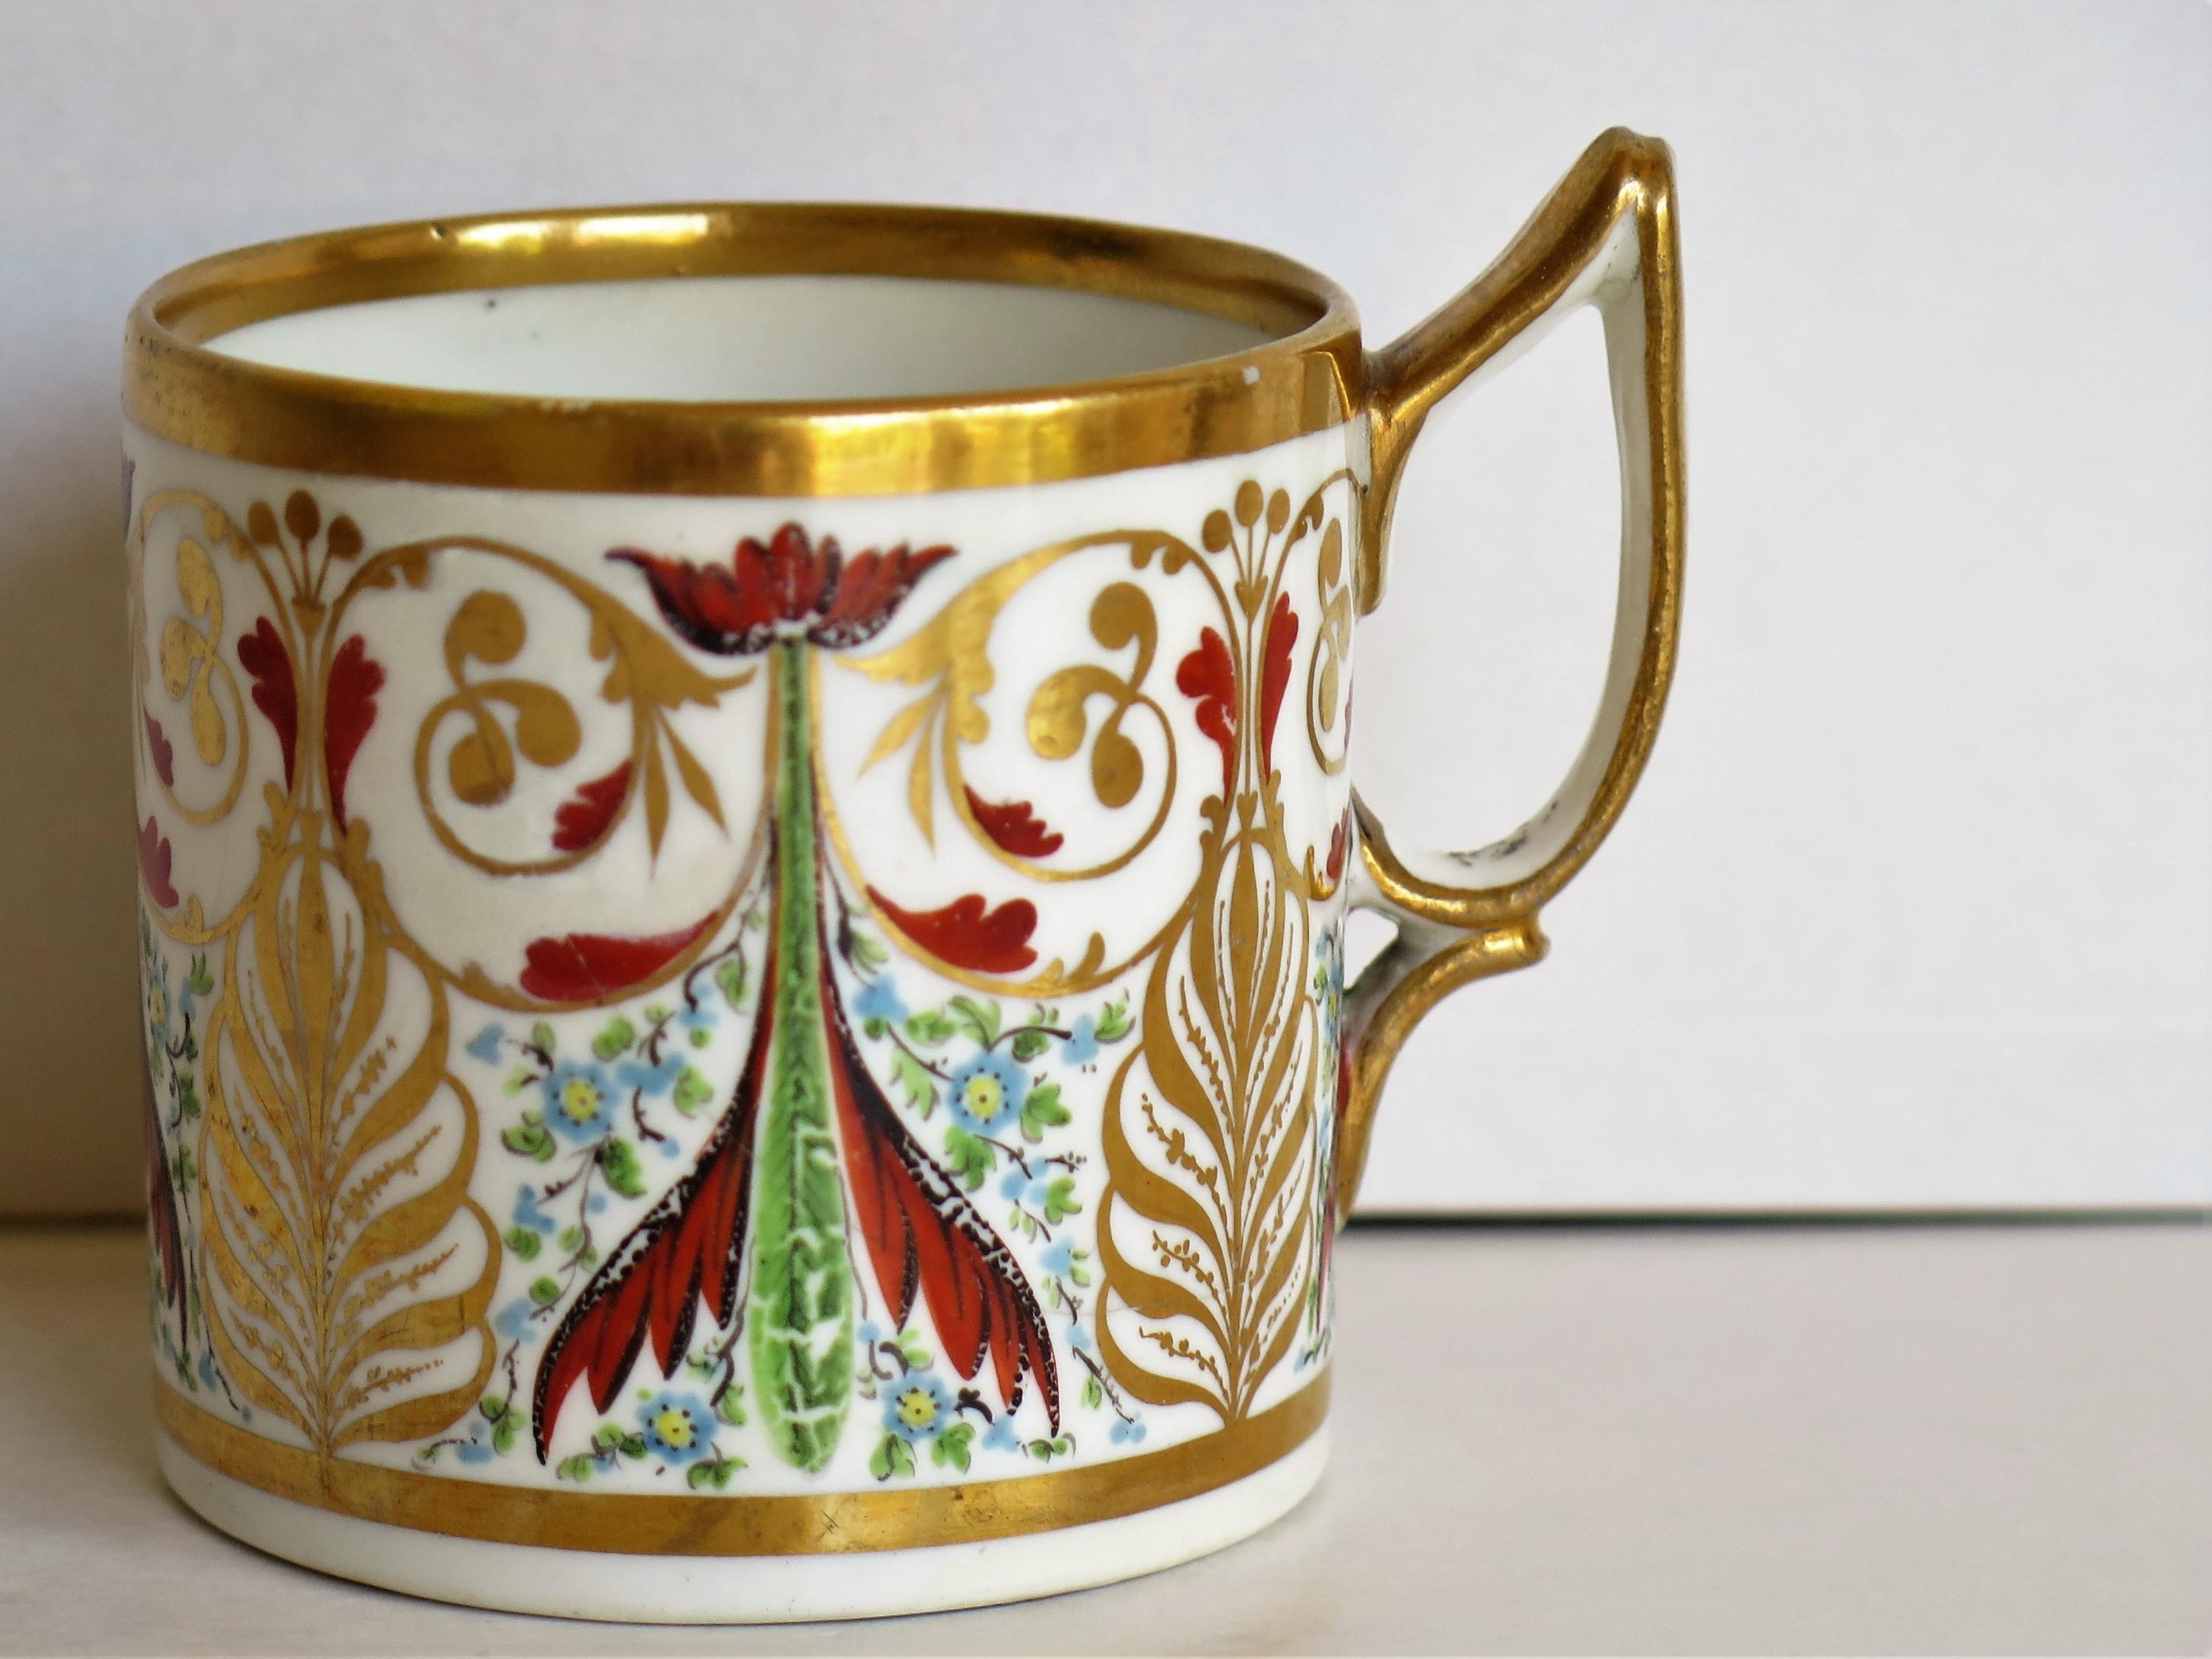 This is a highly collectable, hand-painted porcelain coffee can (cup) , made by Derby porcelain Co., England in the George III period, circa 1810.

The coffee can is straight sided and nominally 2.5 inches square excluding the handle. The handle is